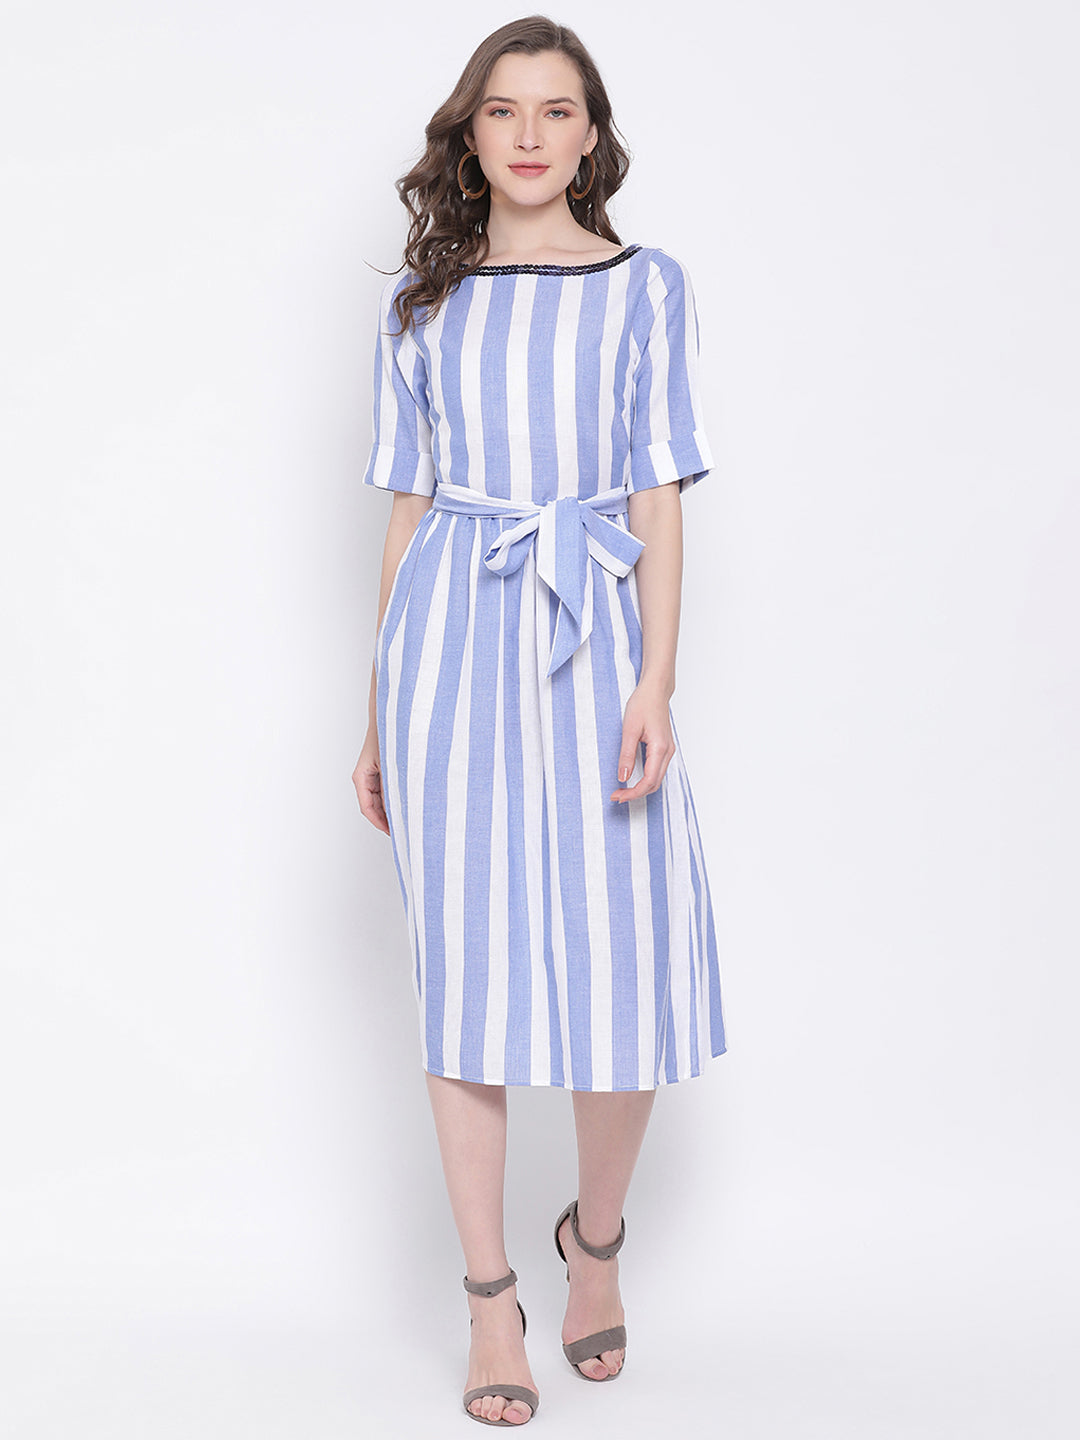 Ly2 Front Striped A-Line Dress